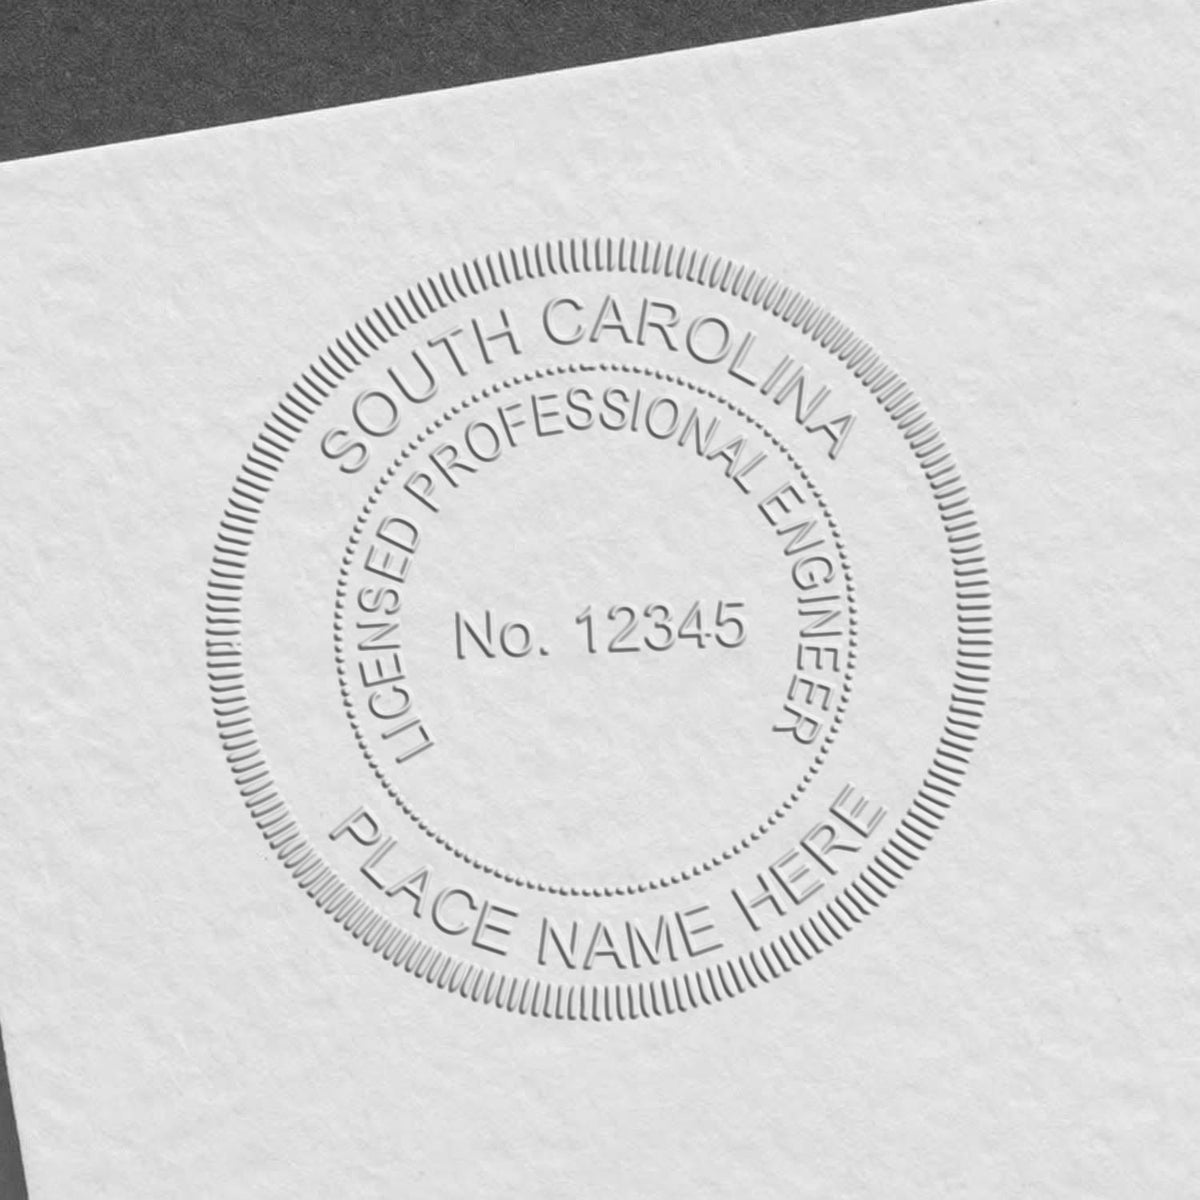 A stamped imprint of the Gift South Carolina Engineer Seal in this stylish lifestyle photo, setting the tone for a unique and personalized product.